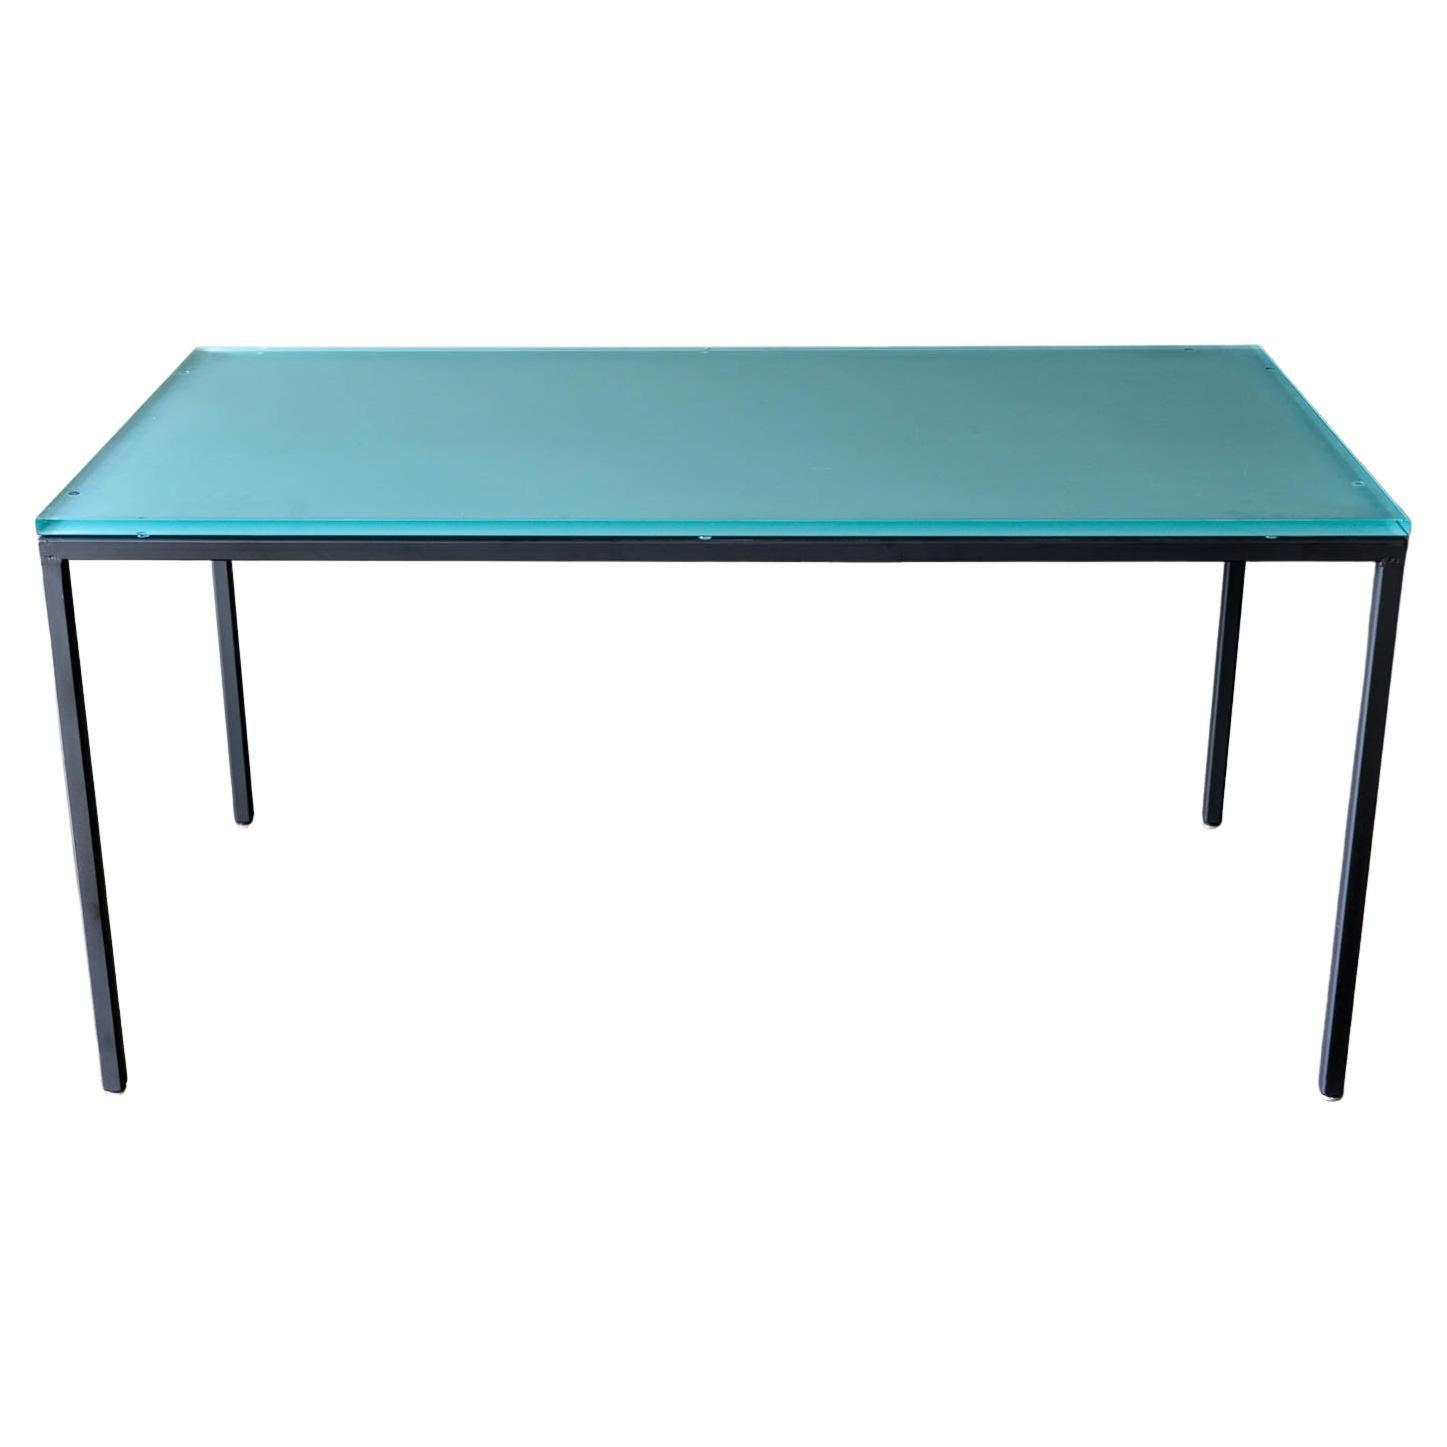 Iron and Glass Dining Table or Desk by Darrell Landrum for Avard NYC, 1950 For Sale